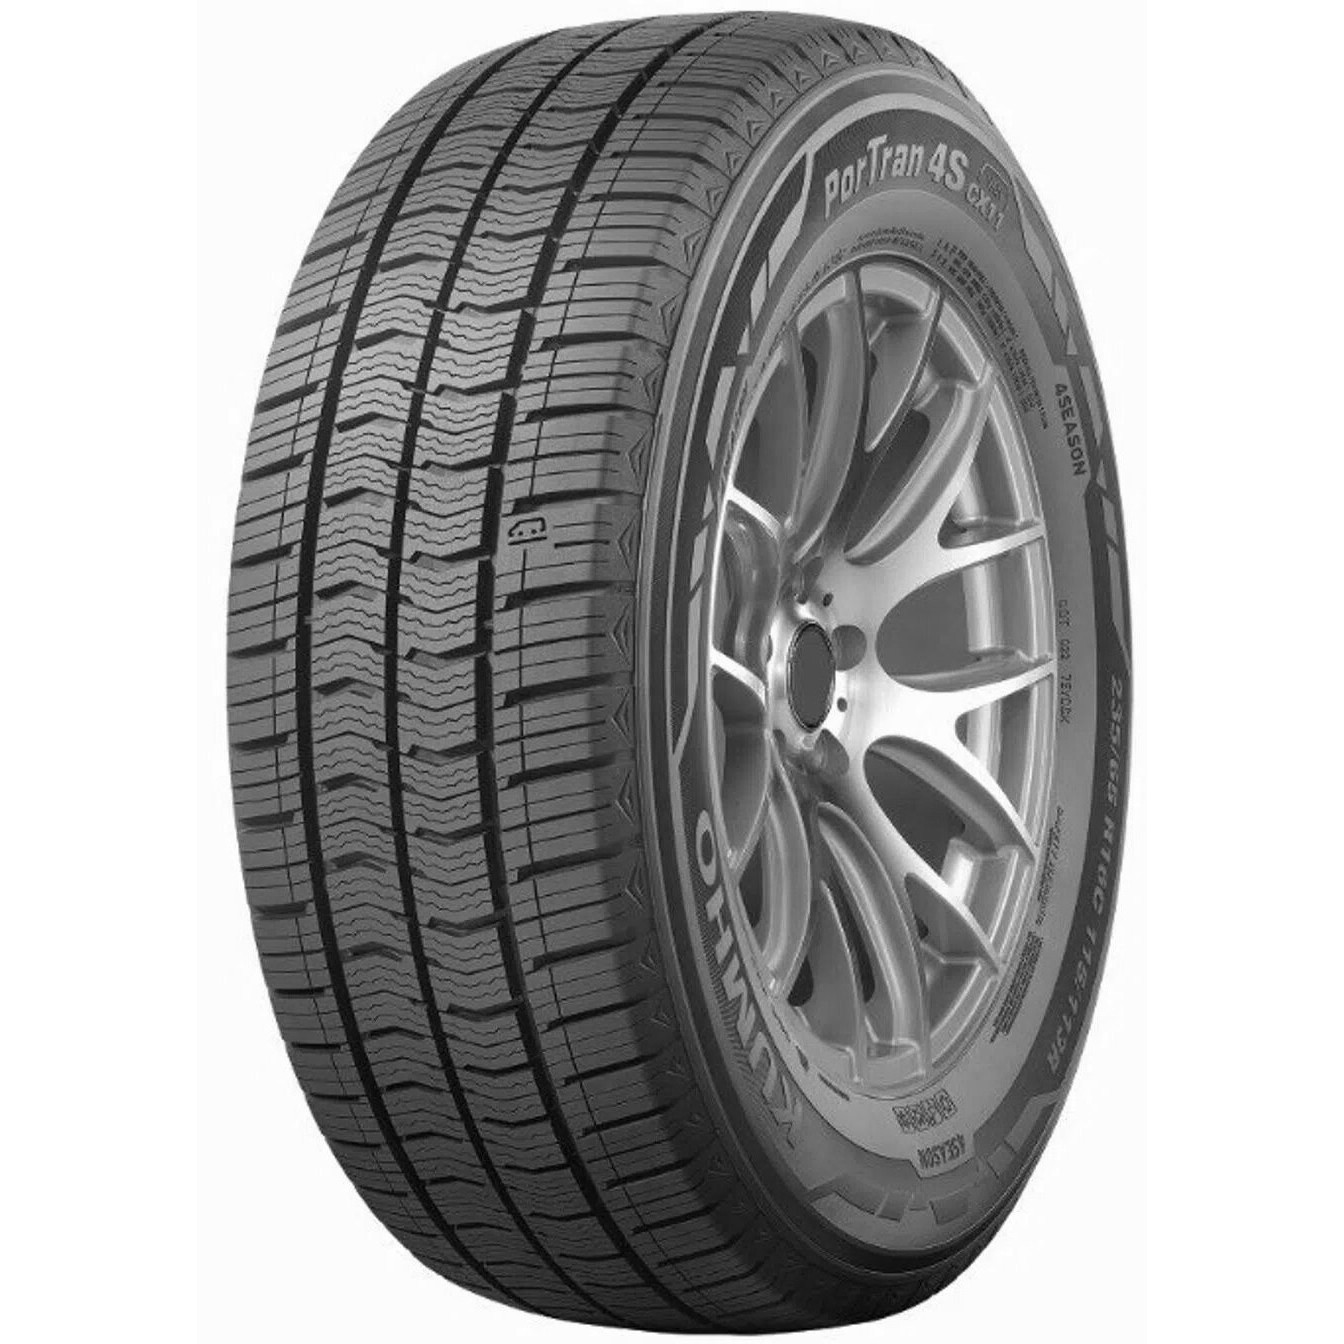 Gomme Nuove Marshal 225/65 R16 112R CX11 M+S pneumatici nuovi All Season